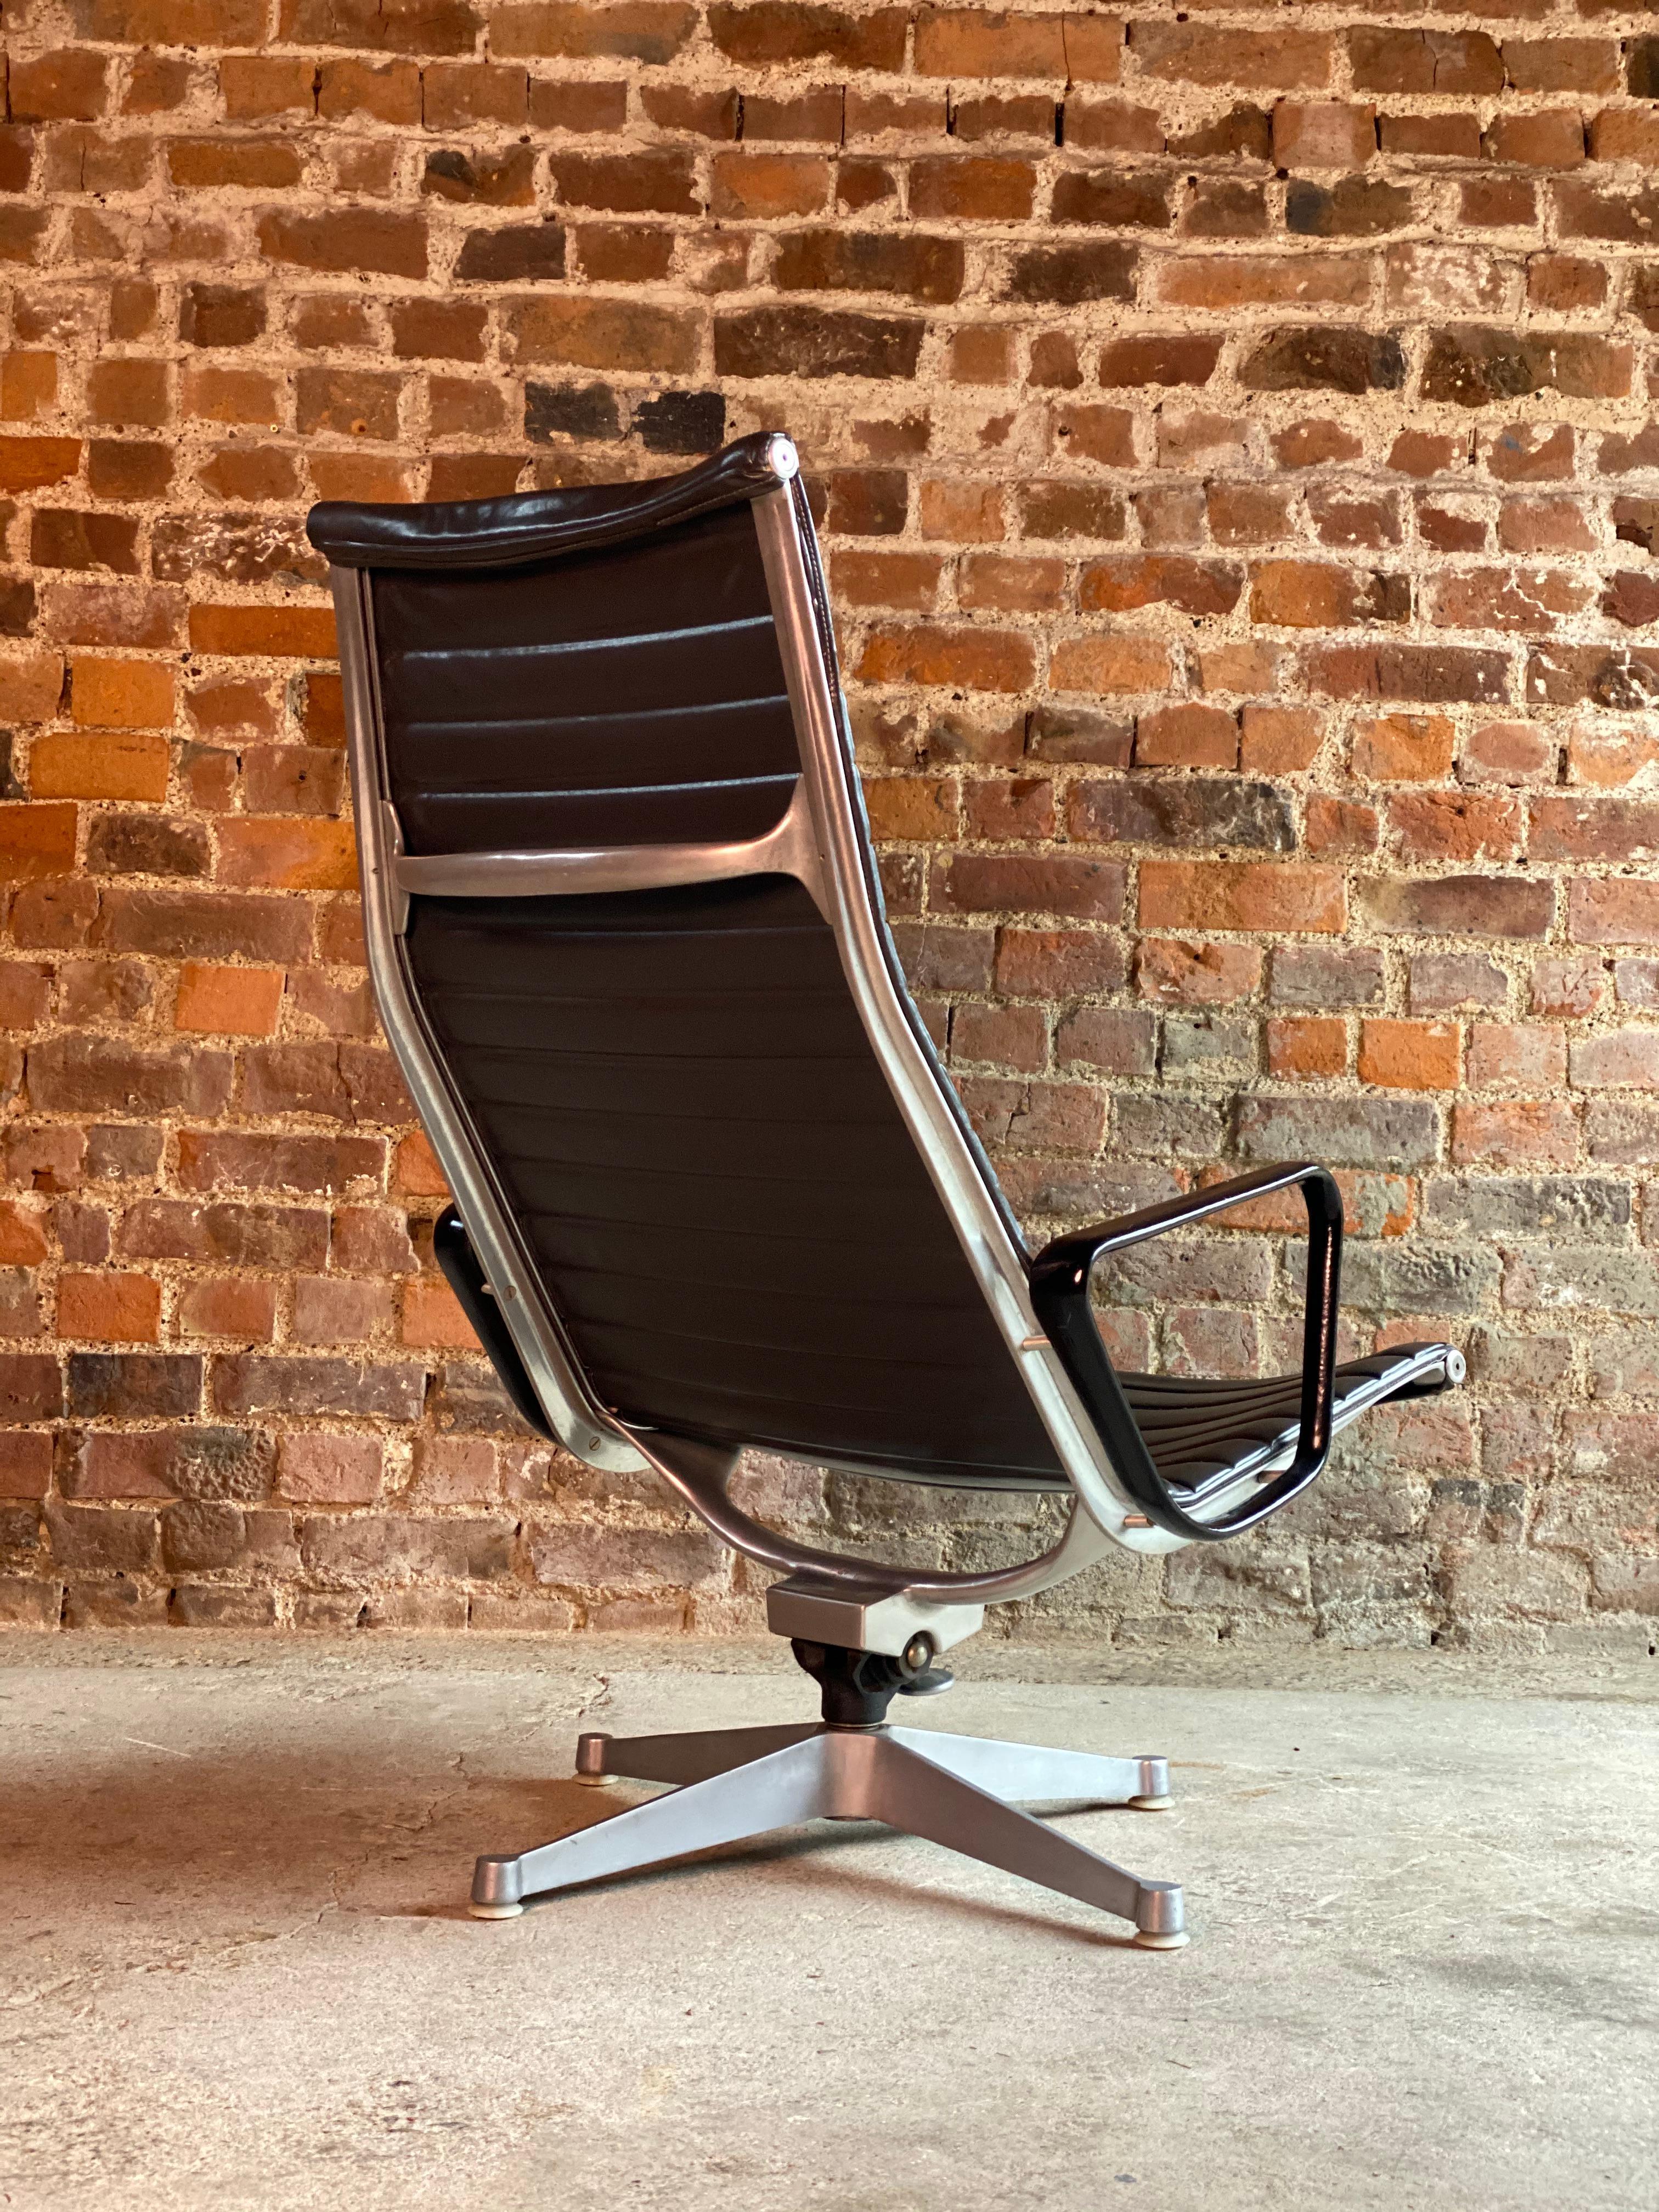 Charles & Ray Eames EA 124 aluminium chair by Herman Miller, USA, circa 1960

Mid-20th century Charles & Ray Eames EA 124 Aluminium group chair by Herman Miller USA finished in original dark grey faux leather upholstery circa 1960, The chair is